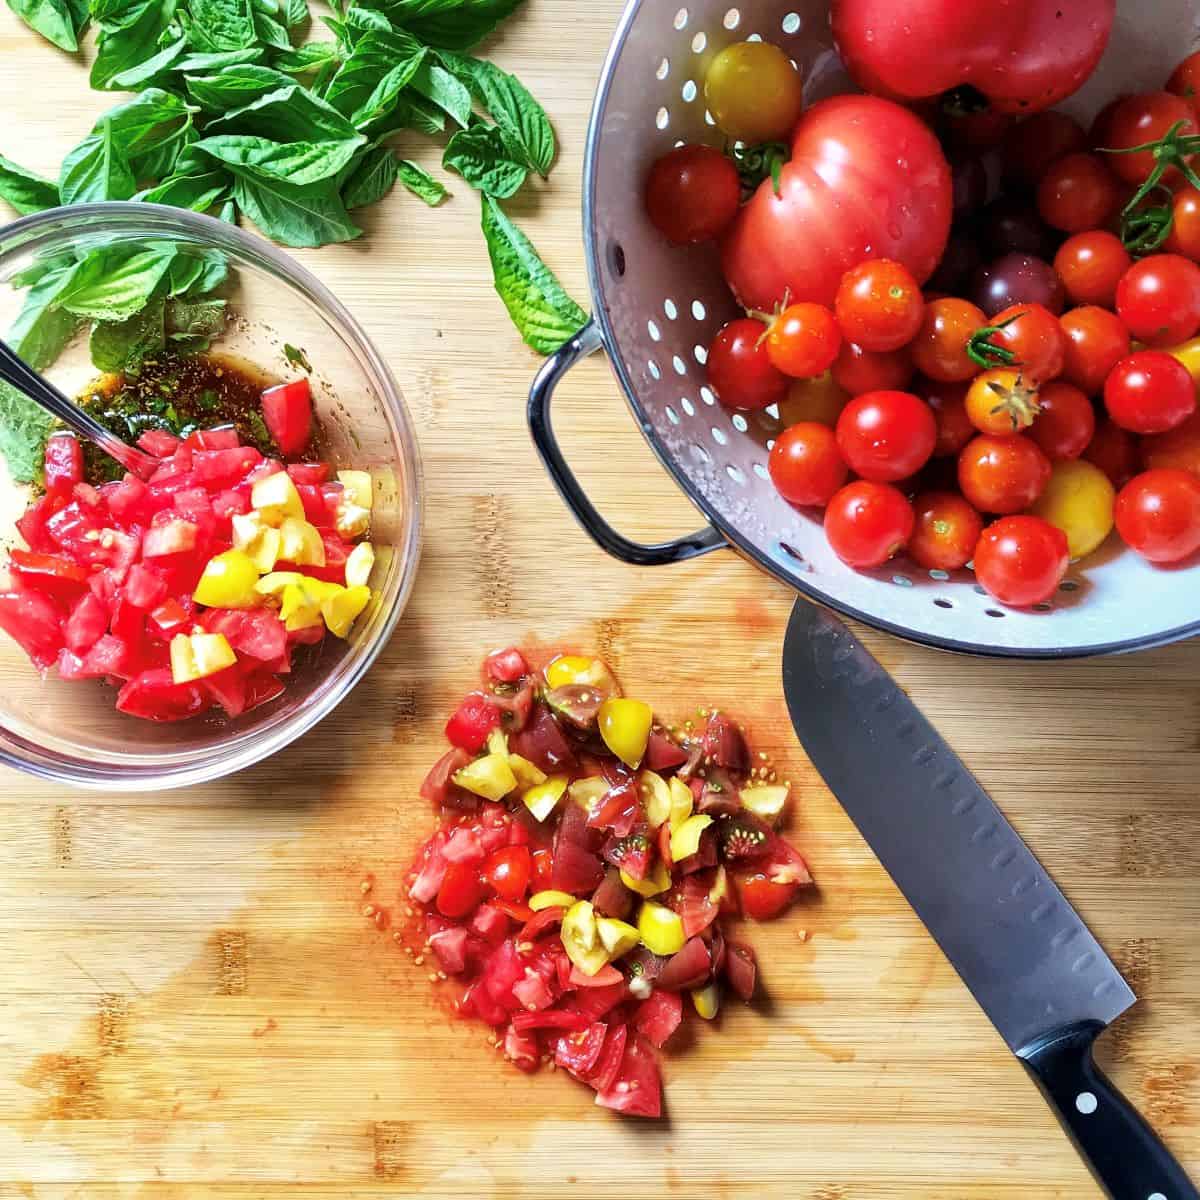 Heirloom cherry tomatoes are chopped into small pieces.